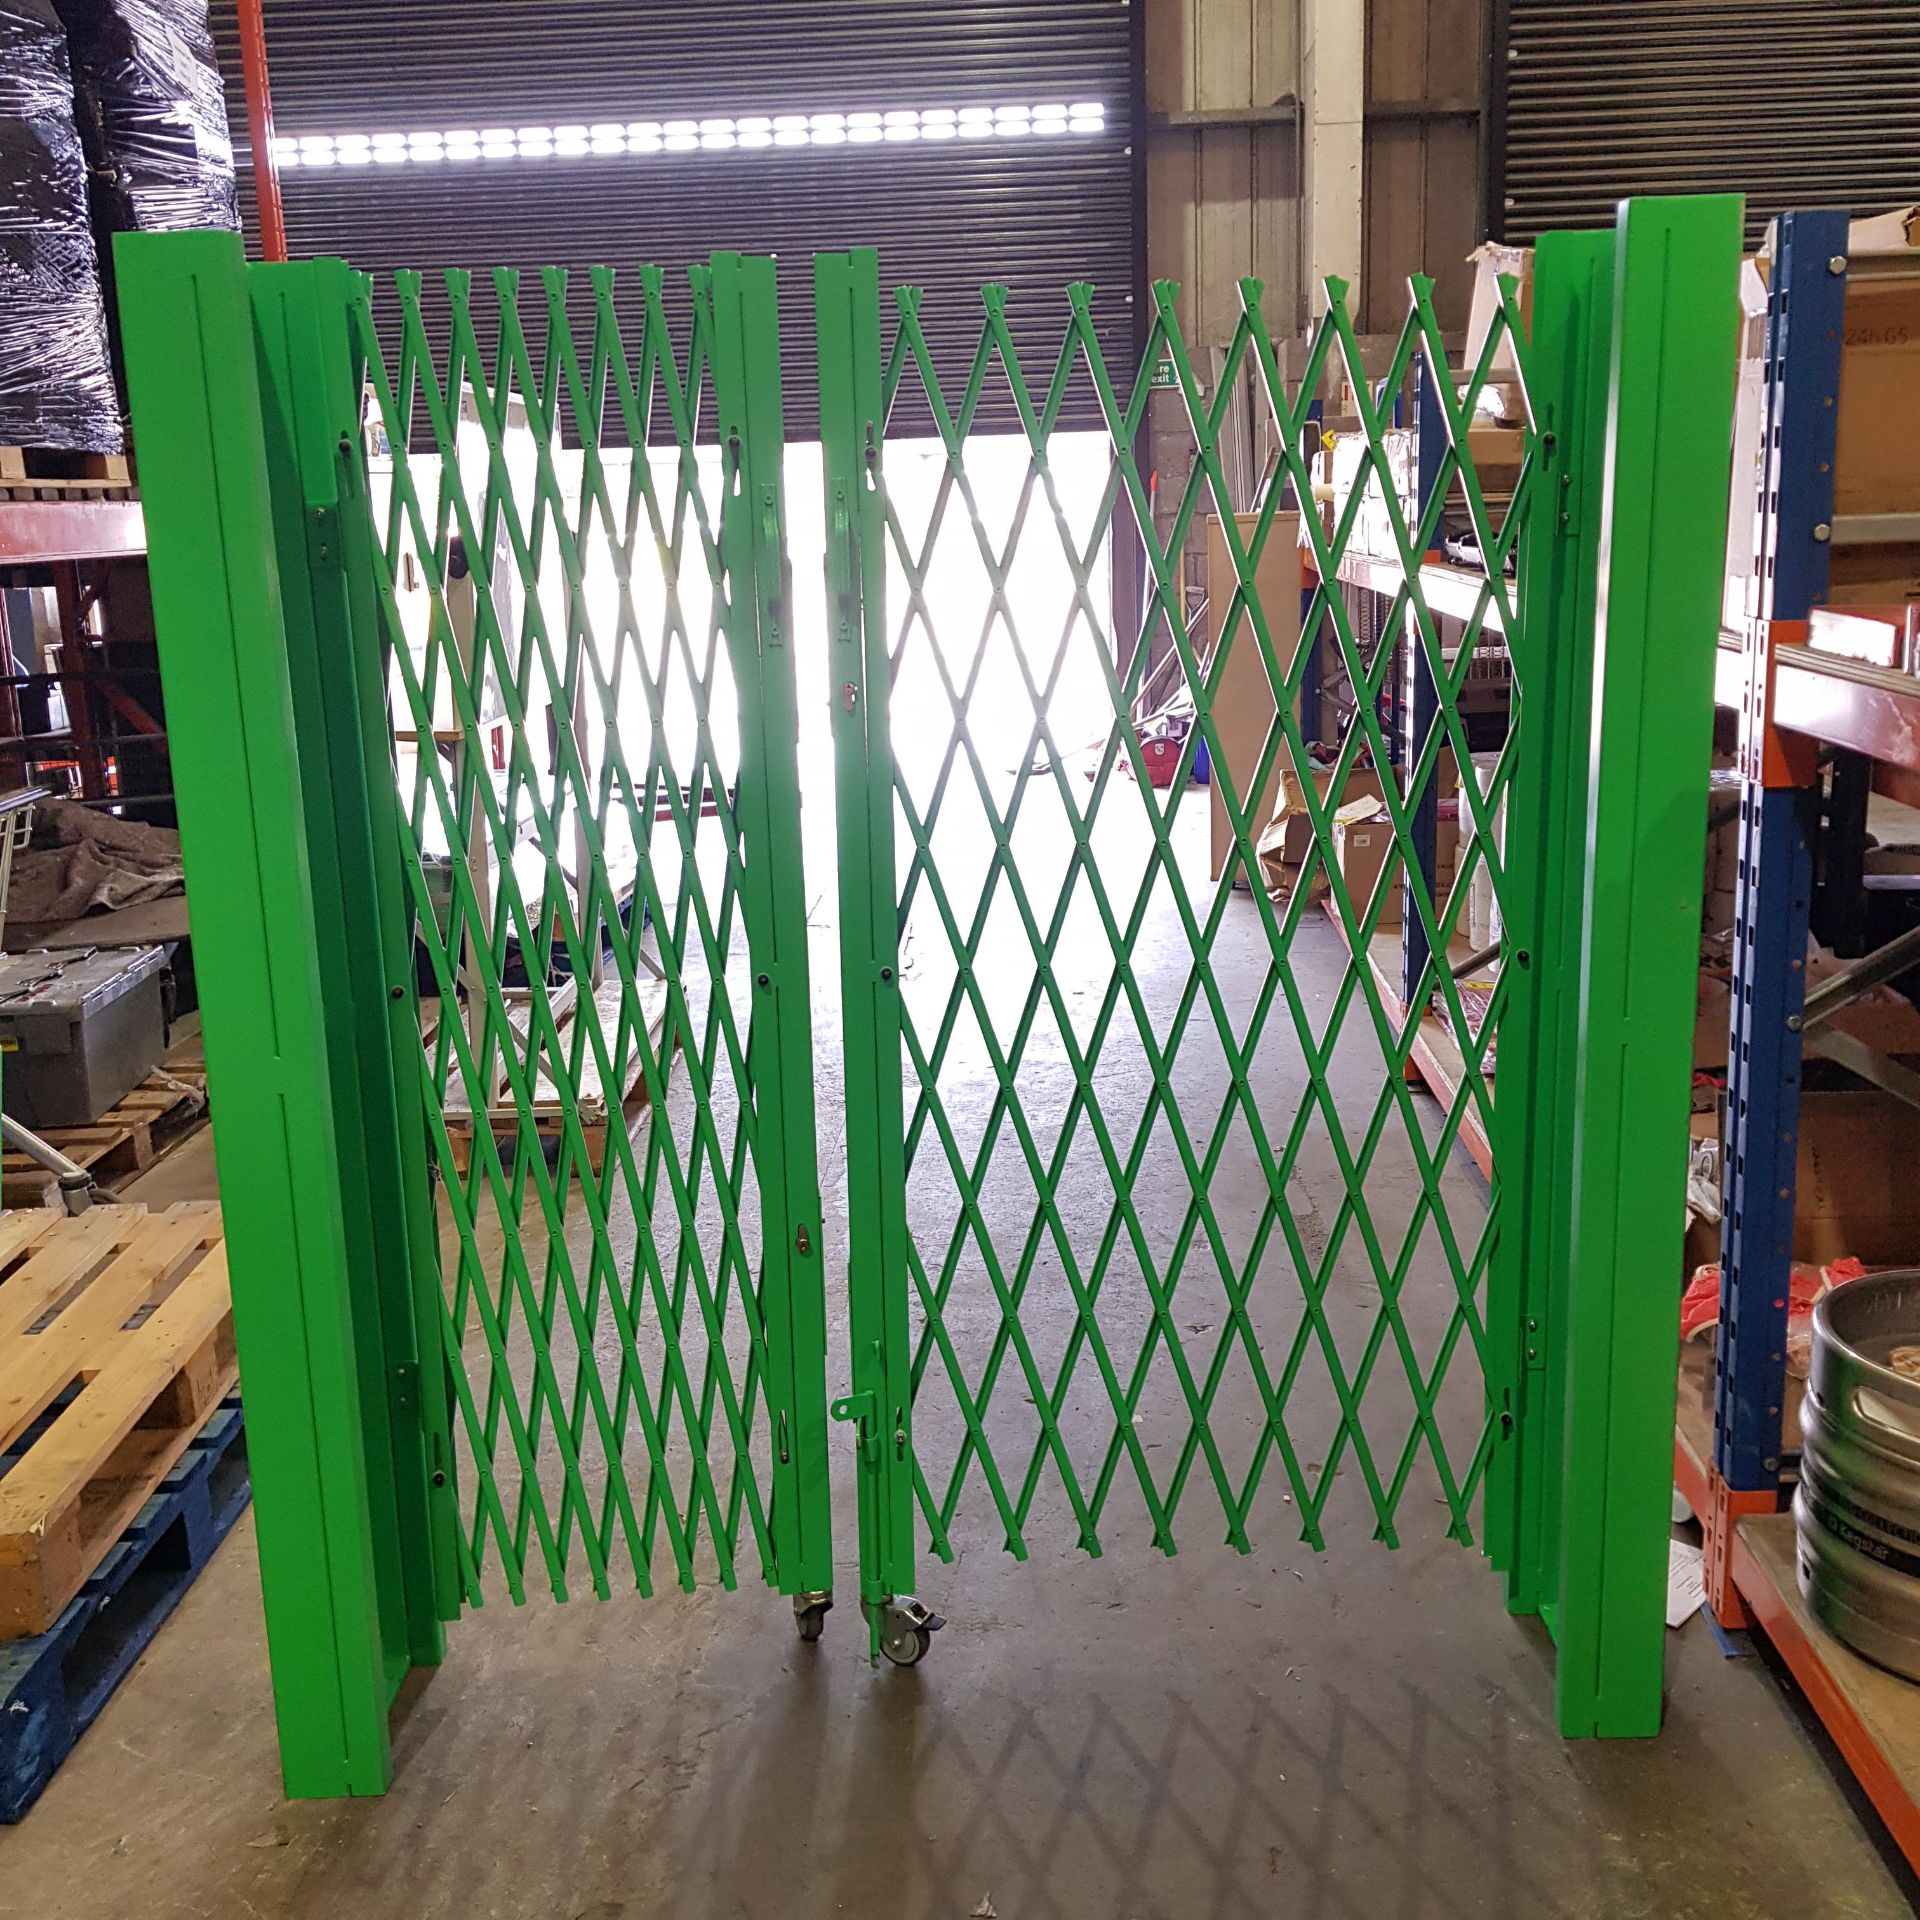 1 X METAL FOLDABLE SECURITY GATES 2 FIXED PILLARS LEFT AND RIGHT SIDES L-4M H-160